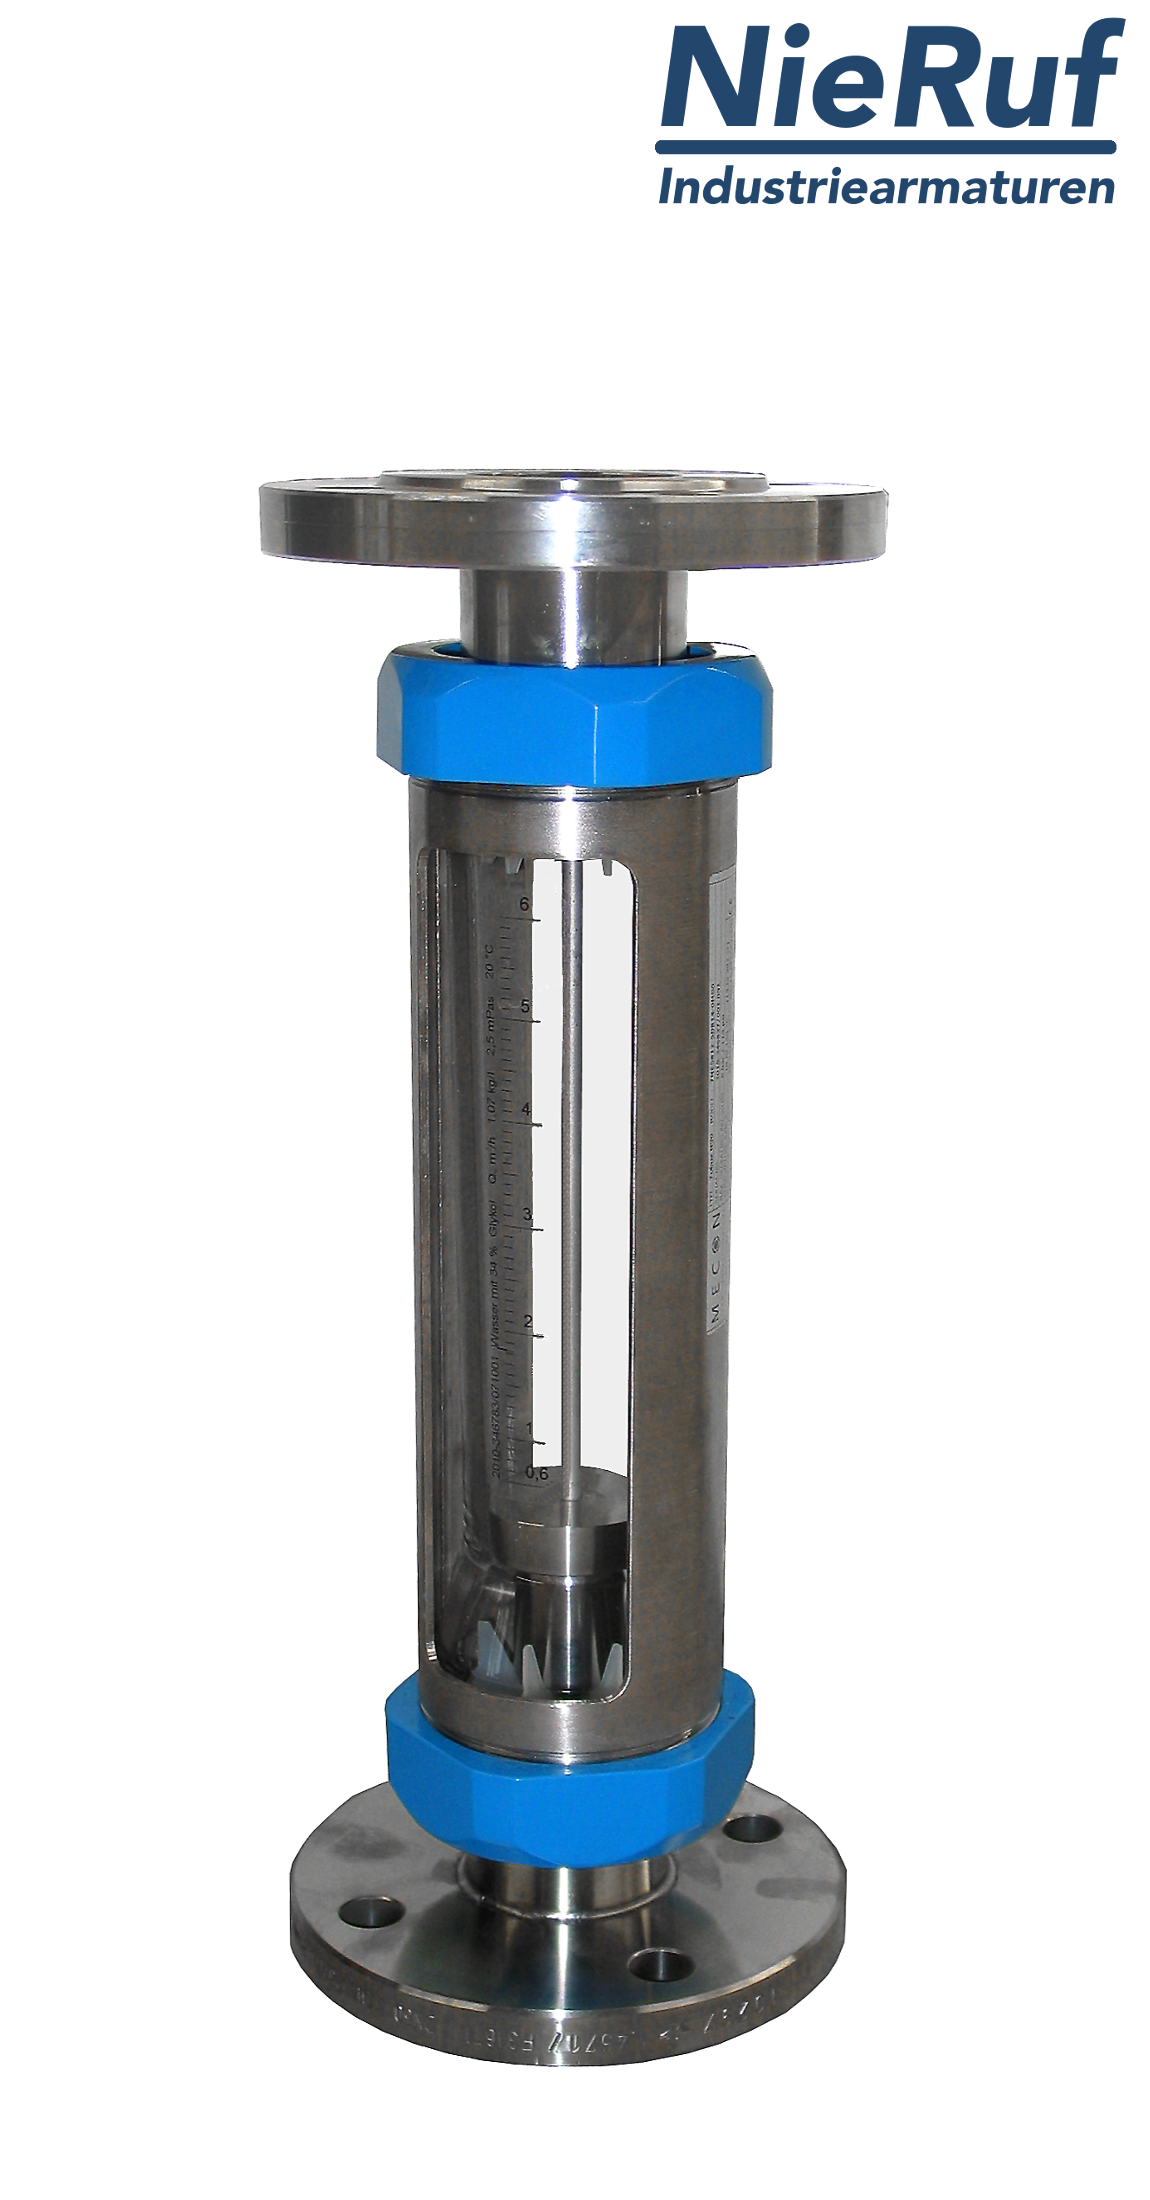 Variable area flowmeter stainless steel + borosilicate flange DN20 50.0 - 500.0 l/h water FKM